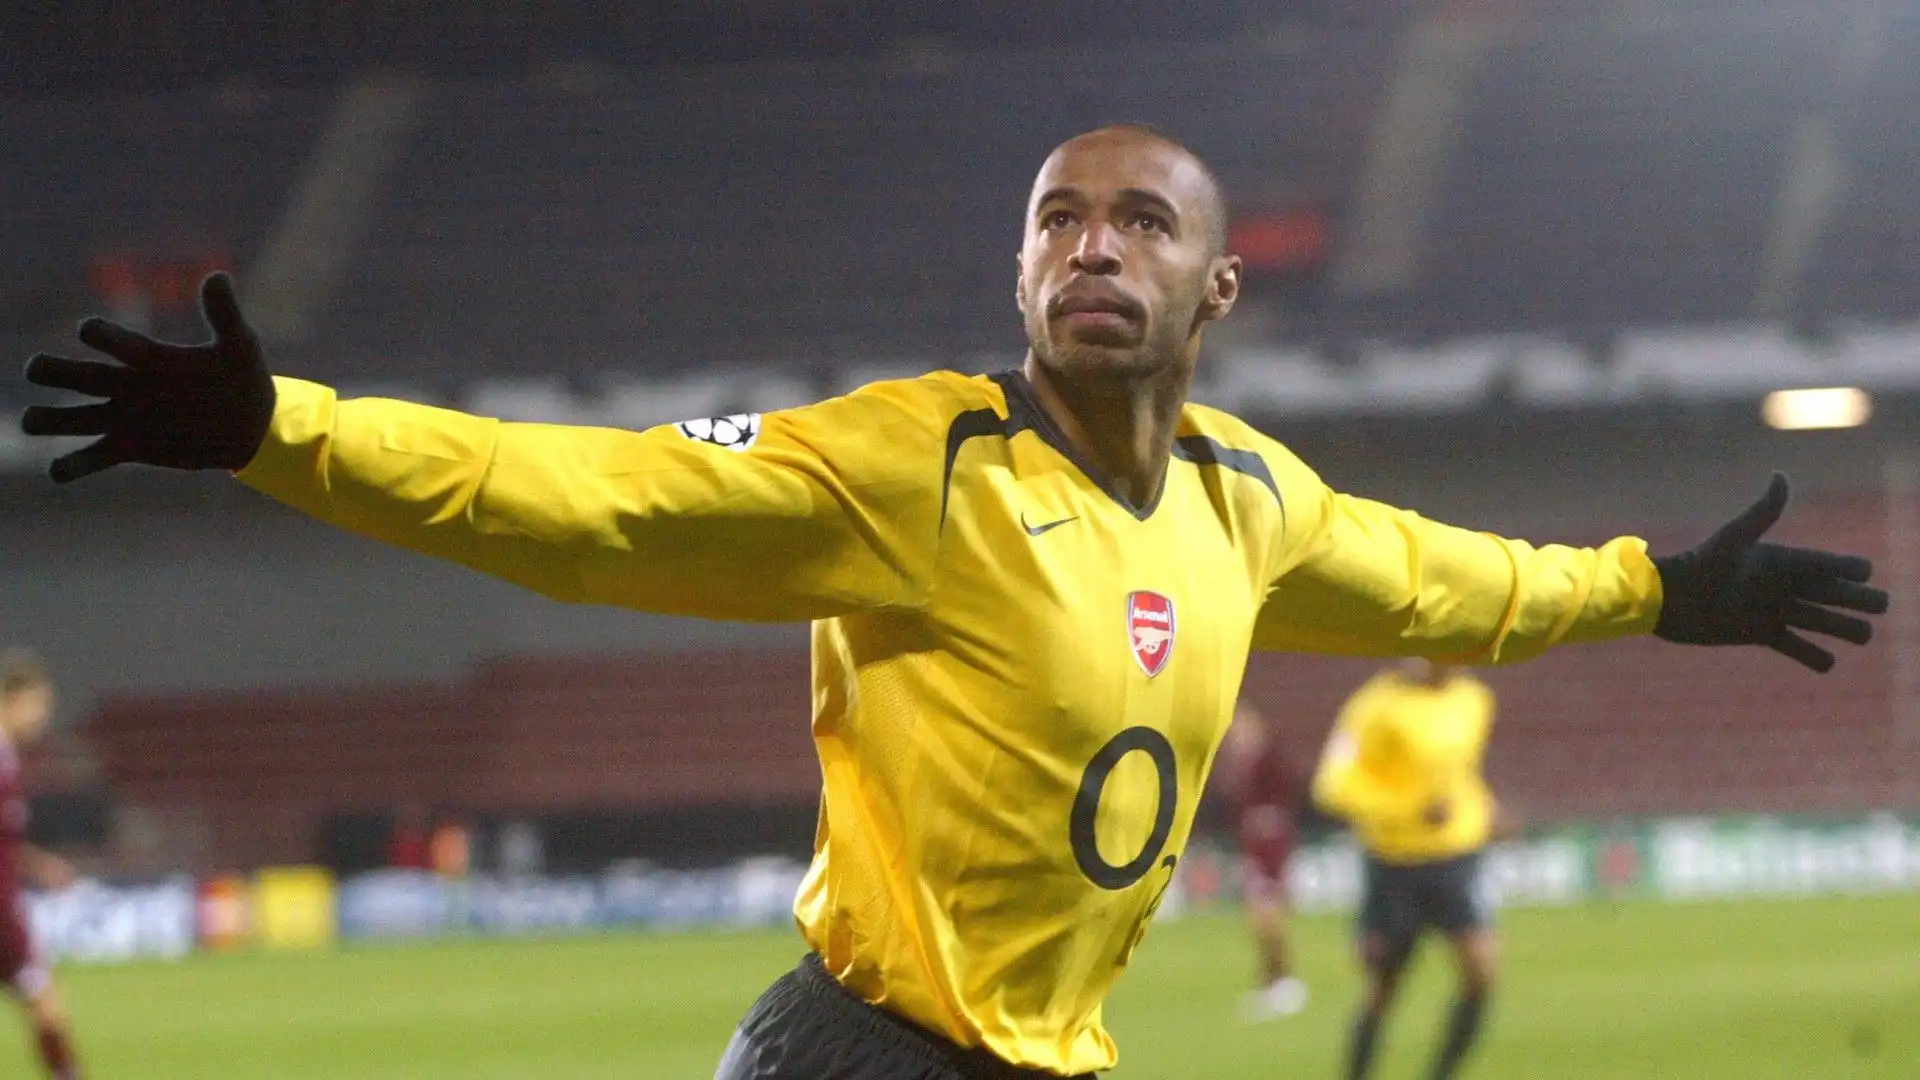 7- Thierry Henry